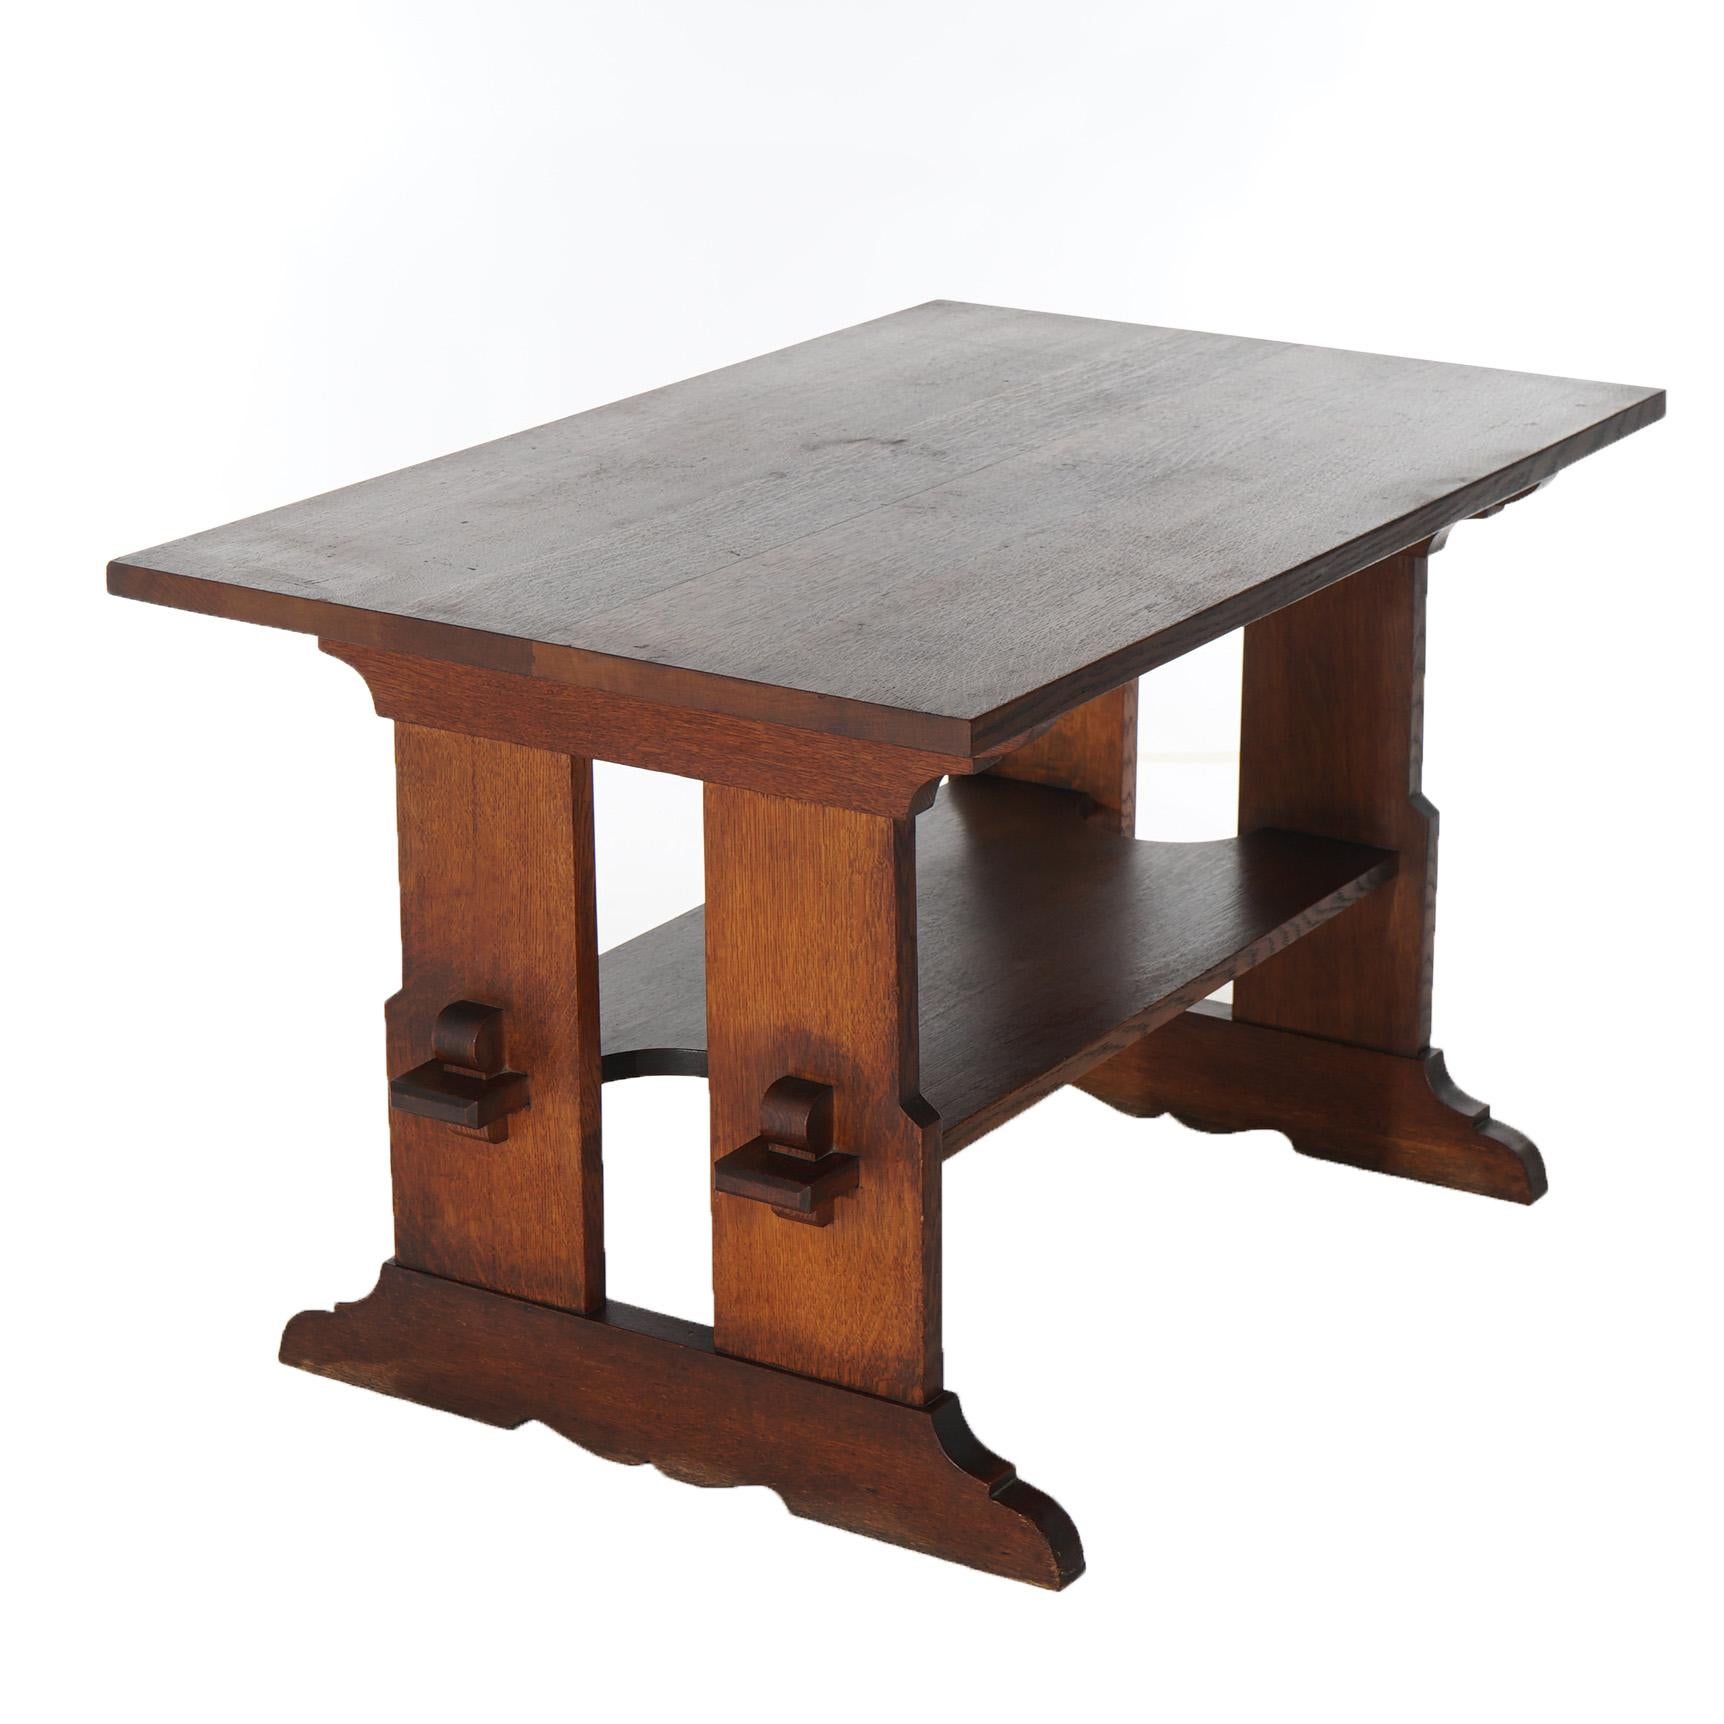 An antique Arts and Crafts Mission dinging table by Stickley offers quarter sawn oak construction in trestle style with mortise and tenon joinery, original maker label as photographed, c1910

Measures - 29